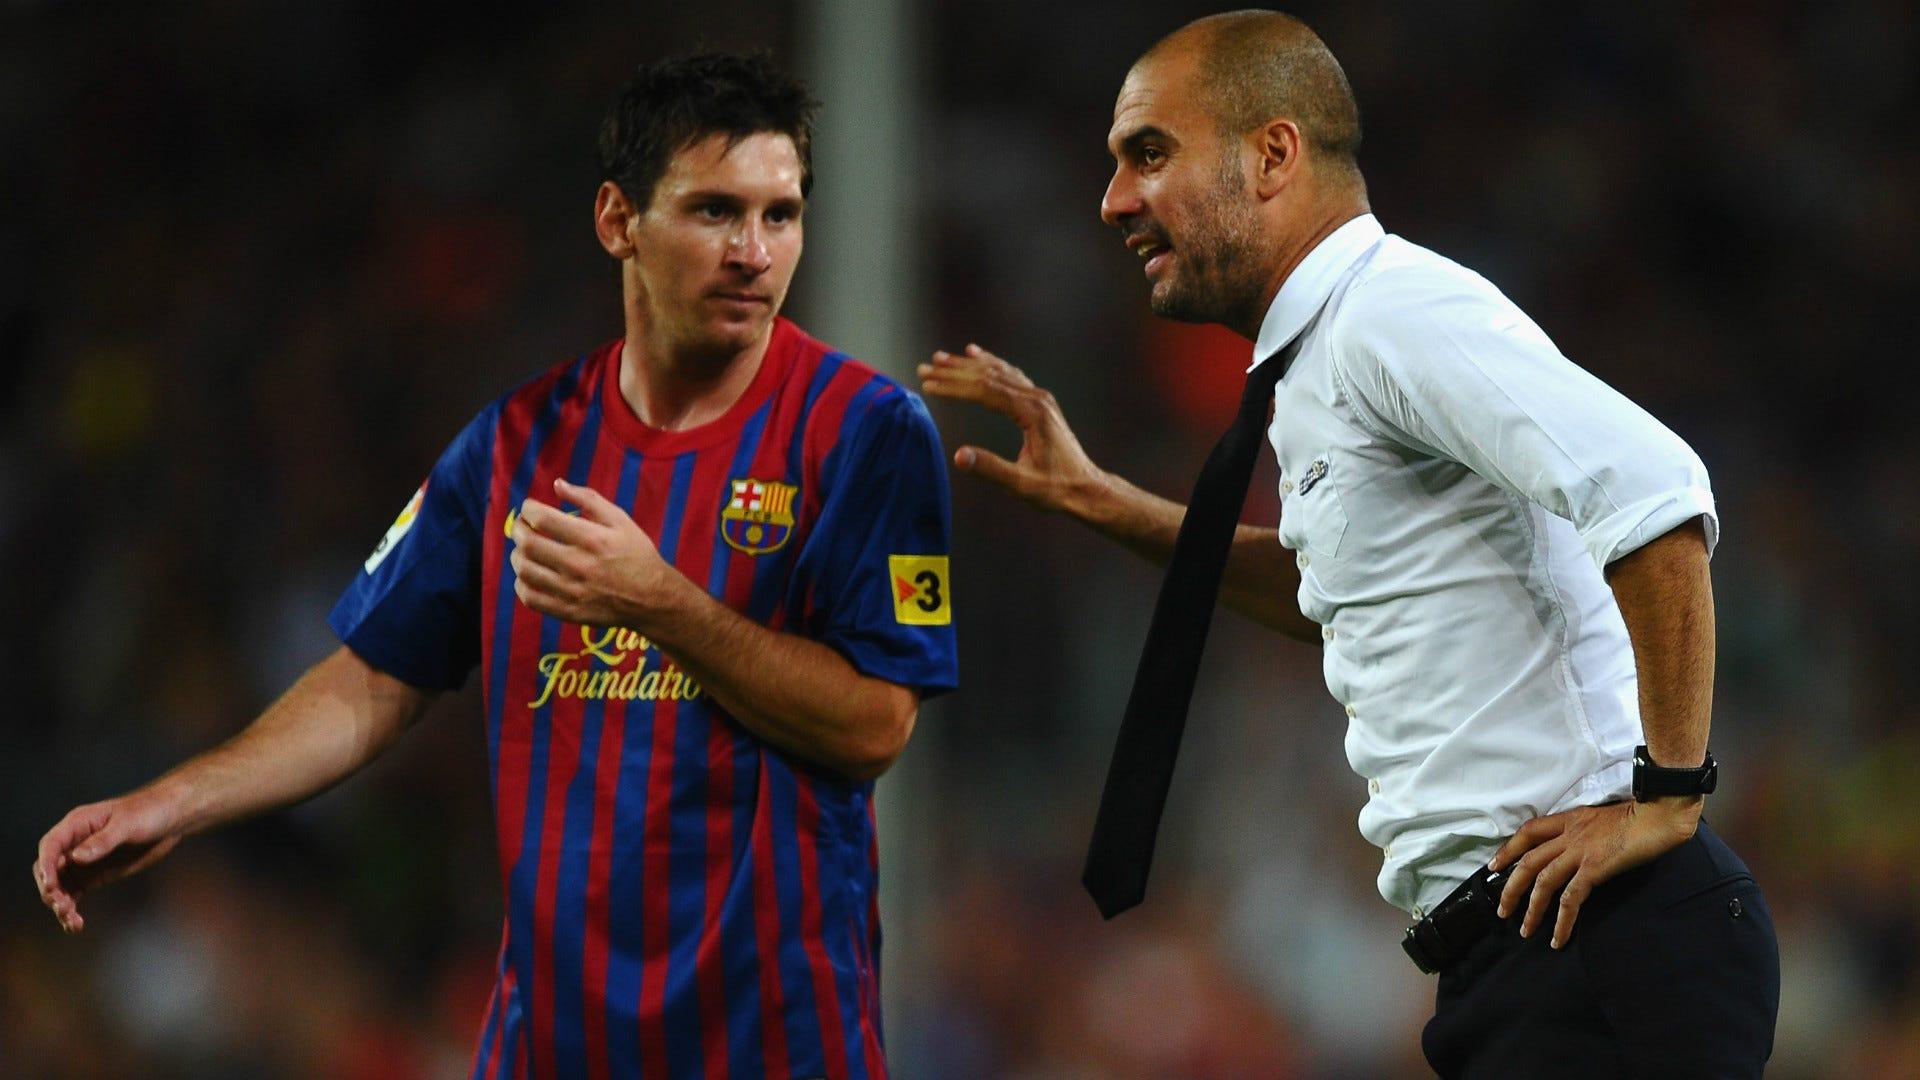 Guardiola Opens Up About Barcelona Allegiance and Messi's Potential Return